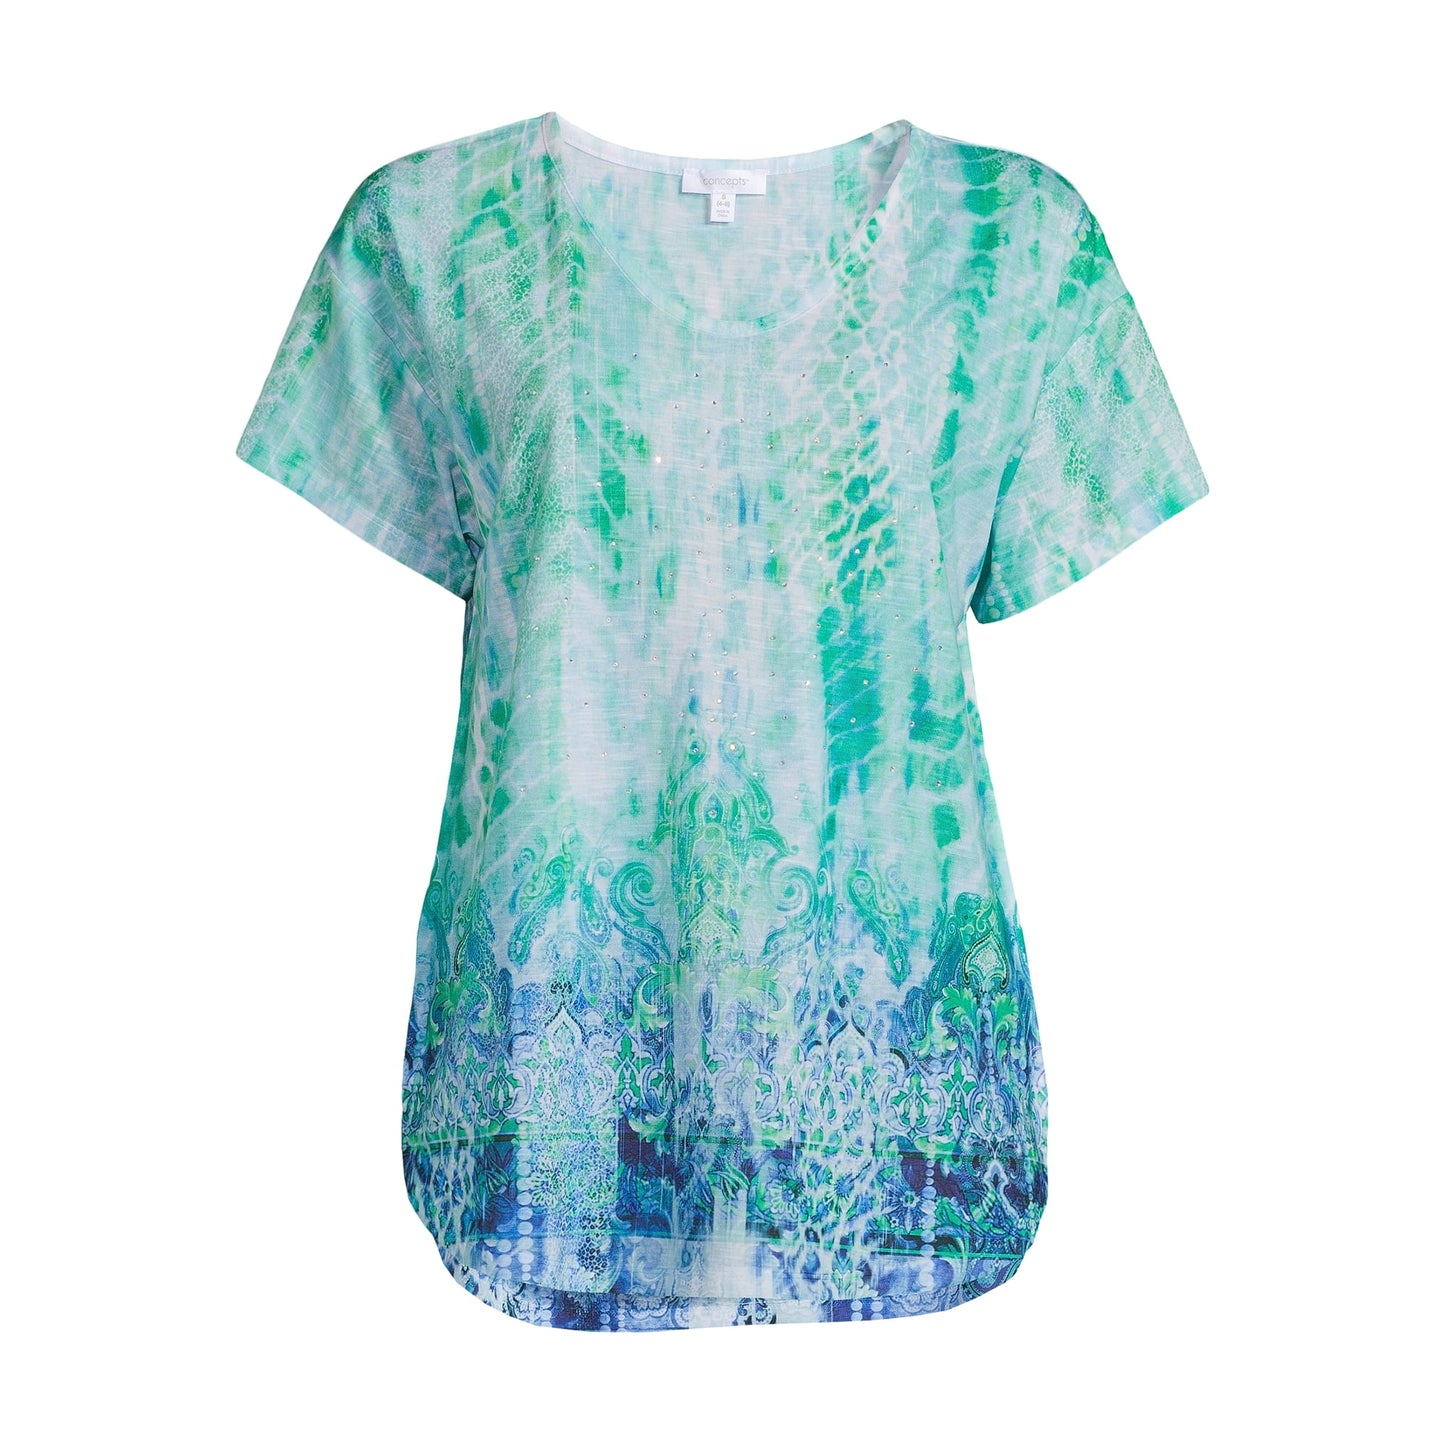 Concepts Women's Sublimation Print Top with Short Sleeves